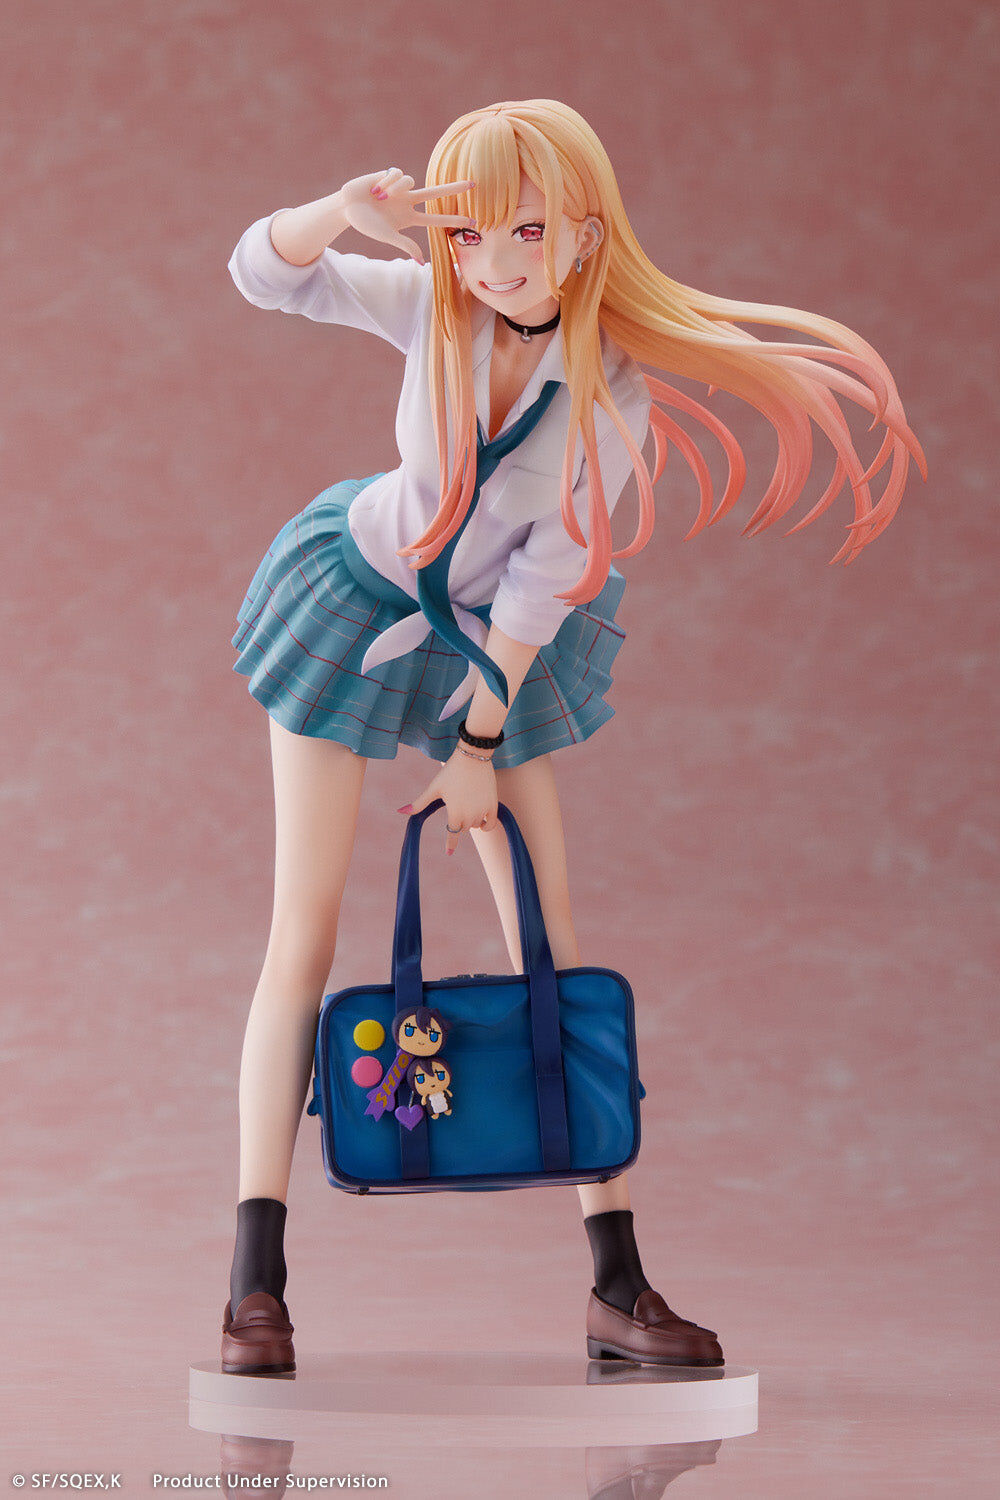 6 Major Materials of Anime Figure – The Composition of our Collectibles